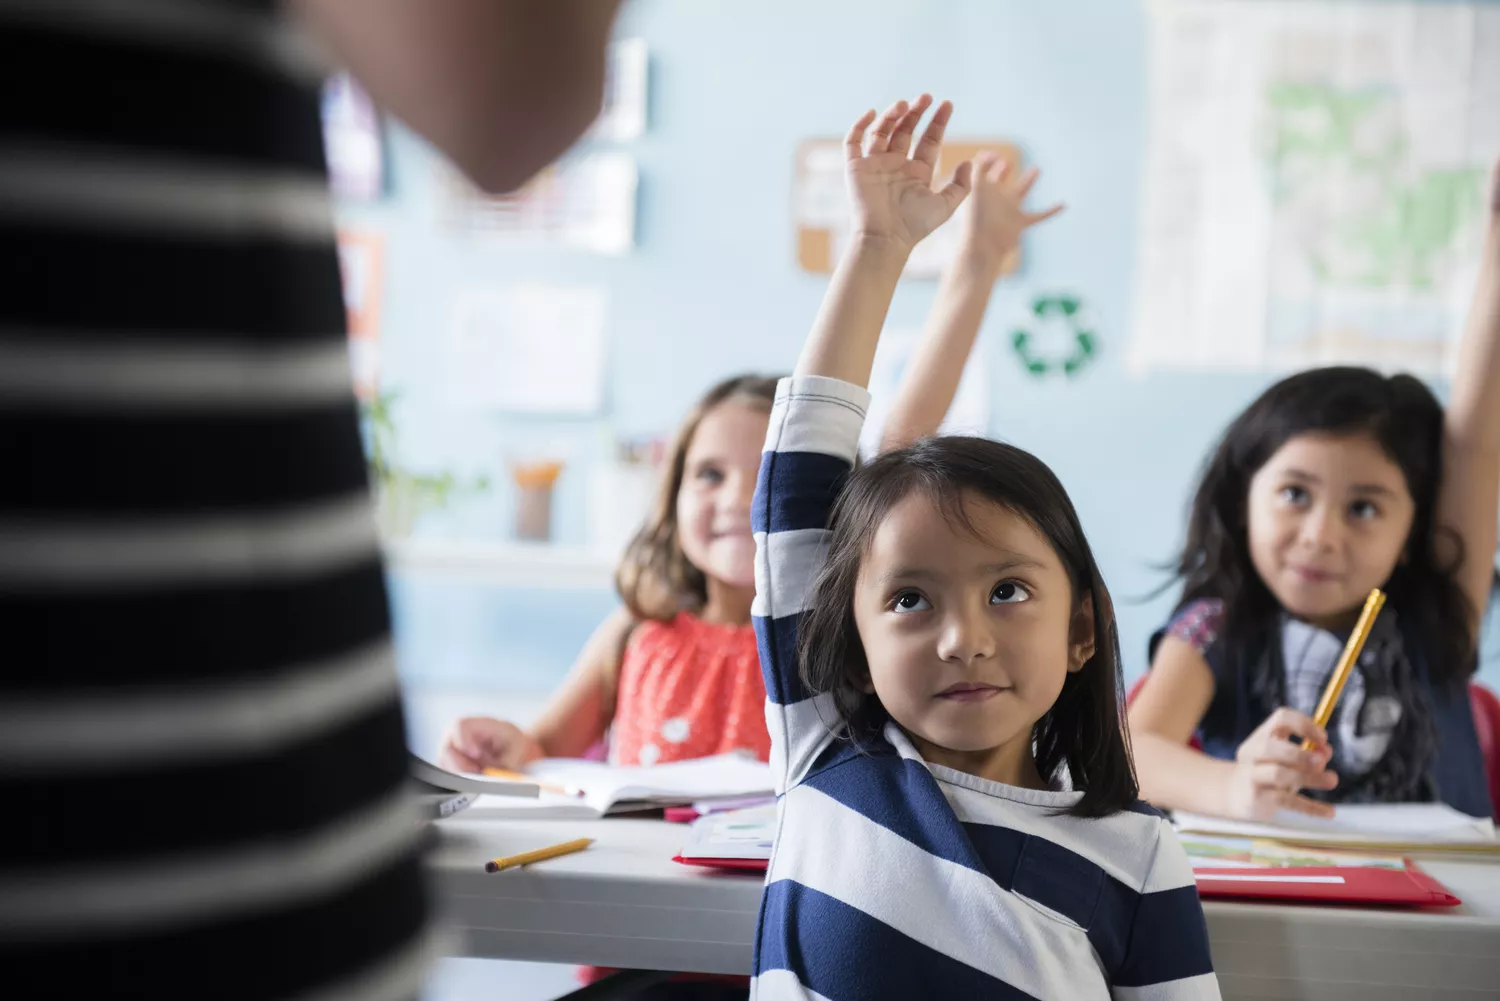 Cute children in a classroom with their hands raised